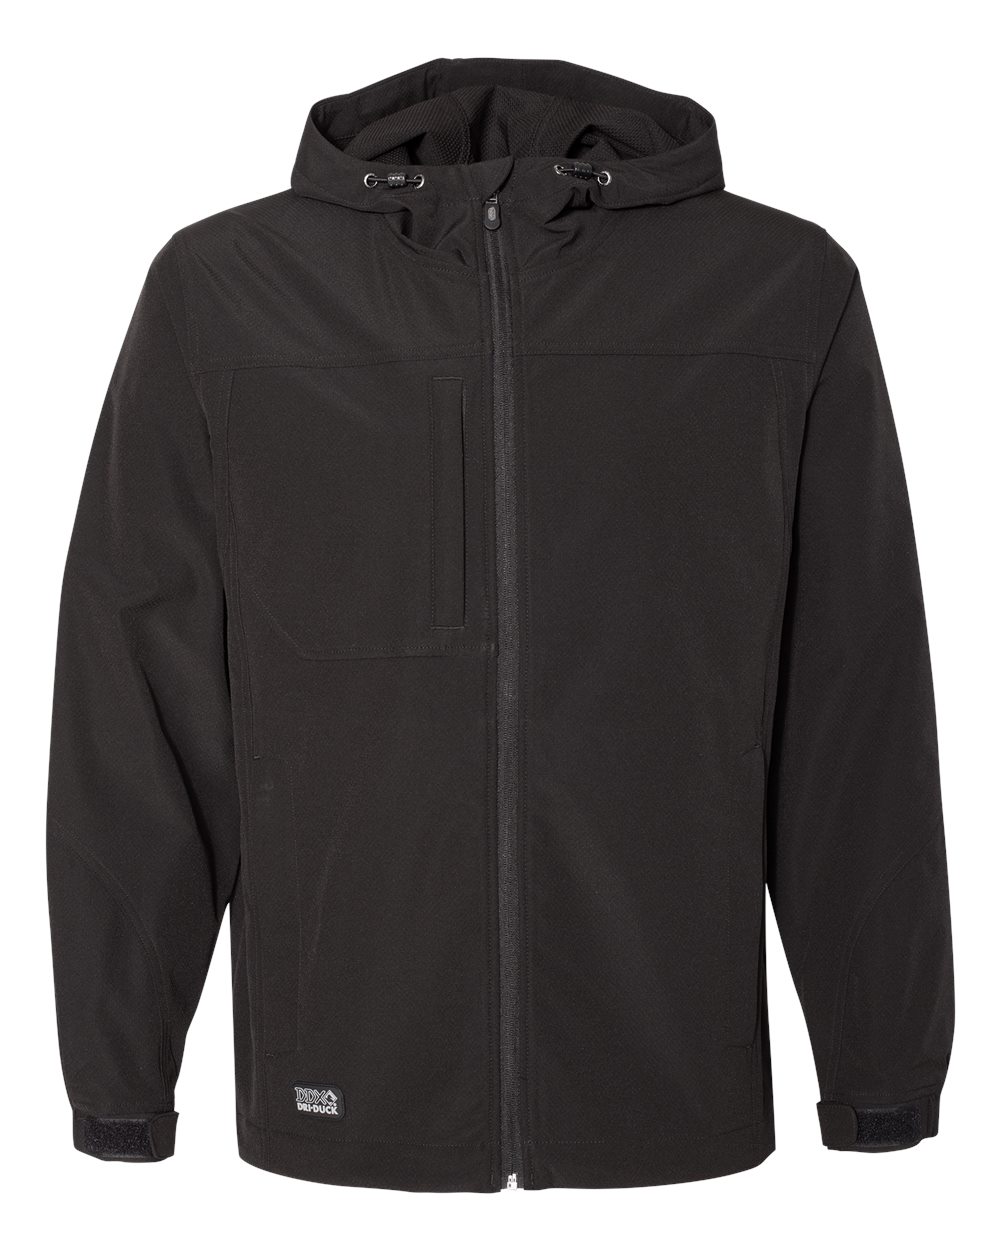 Apex Soft Shell Hooded Jacket - 5310-